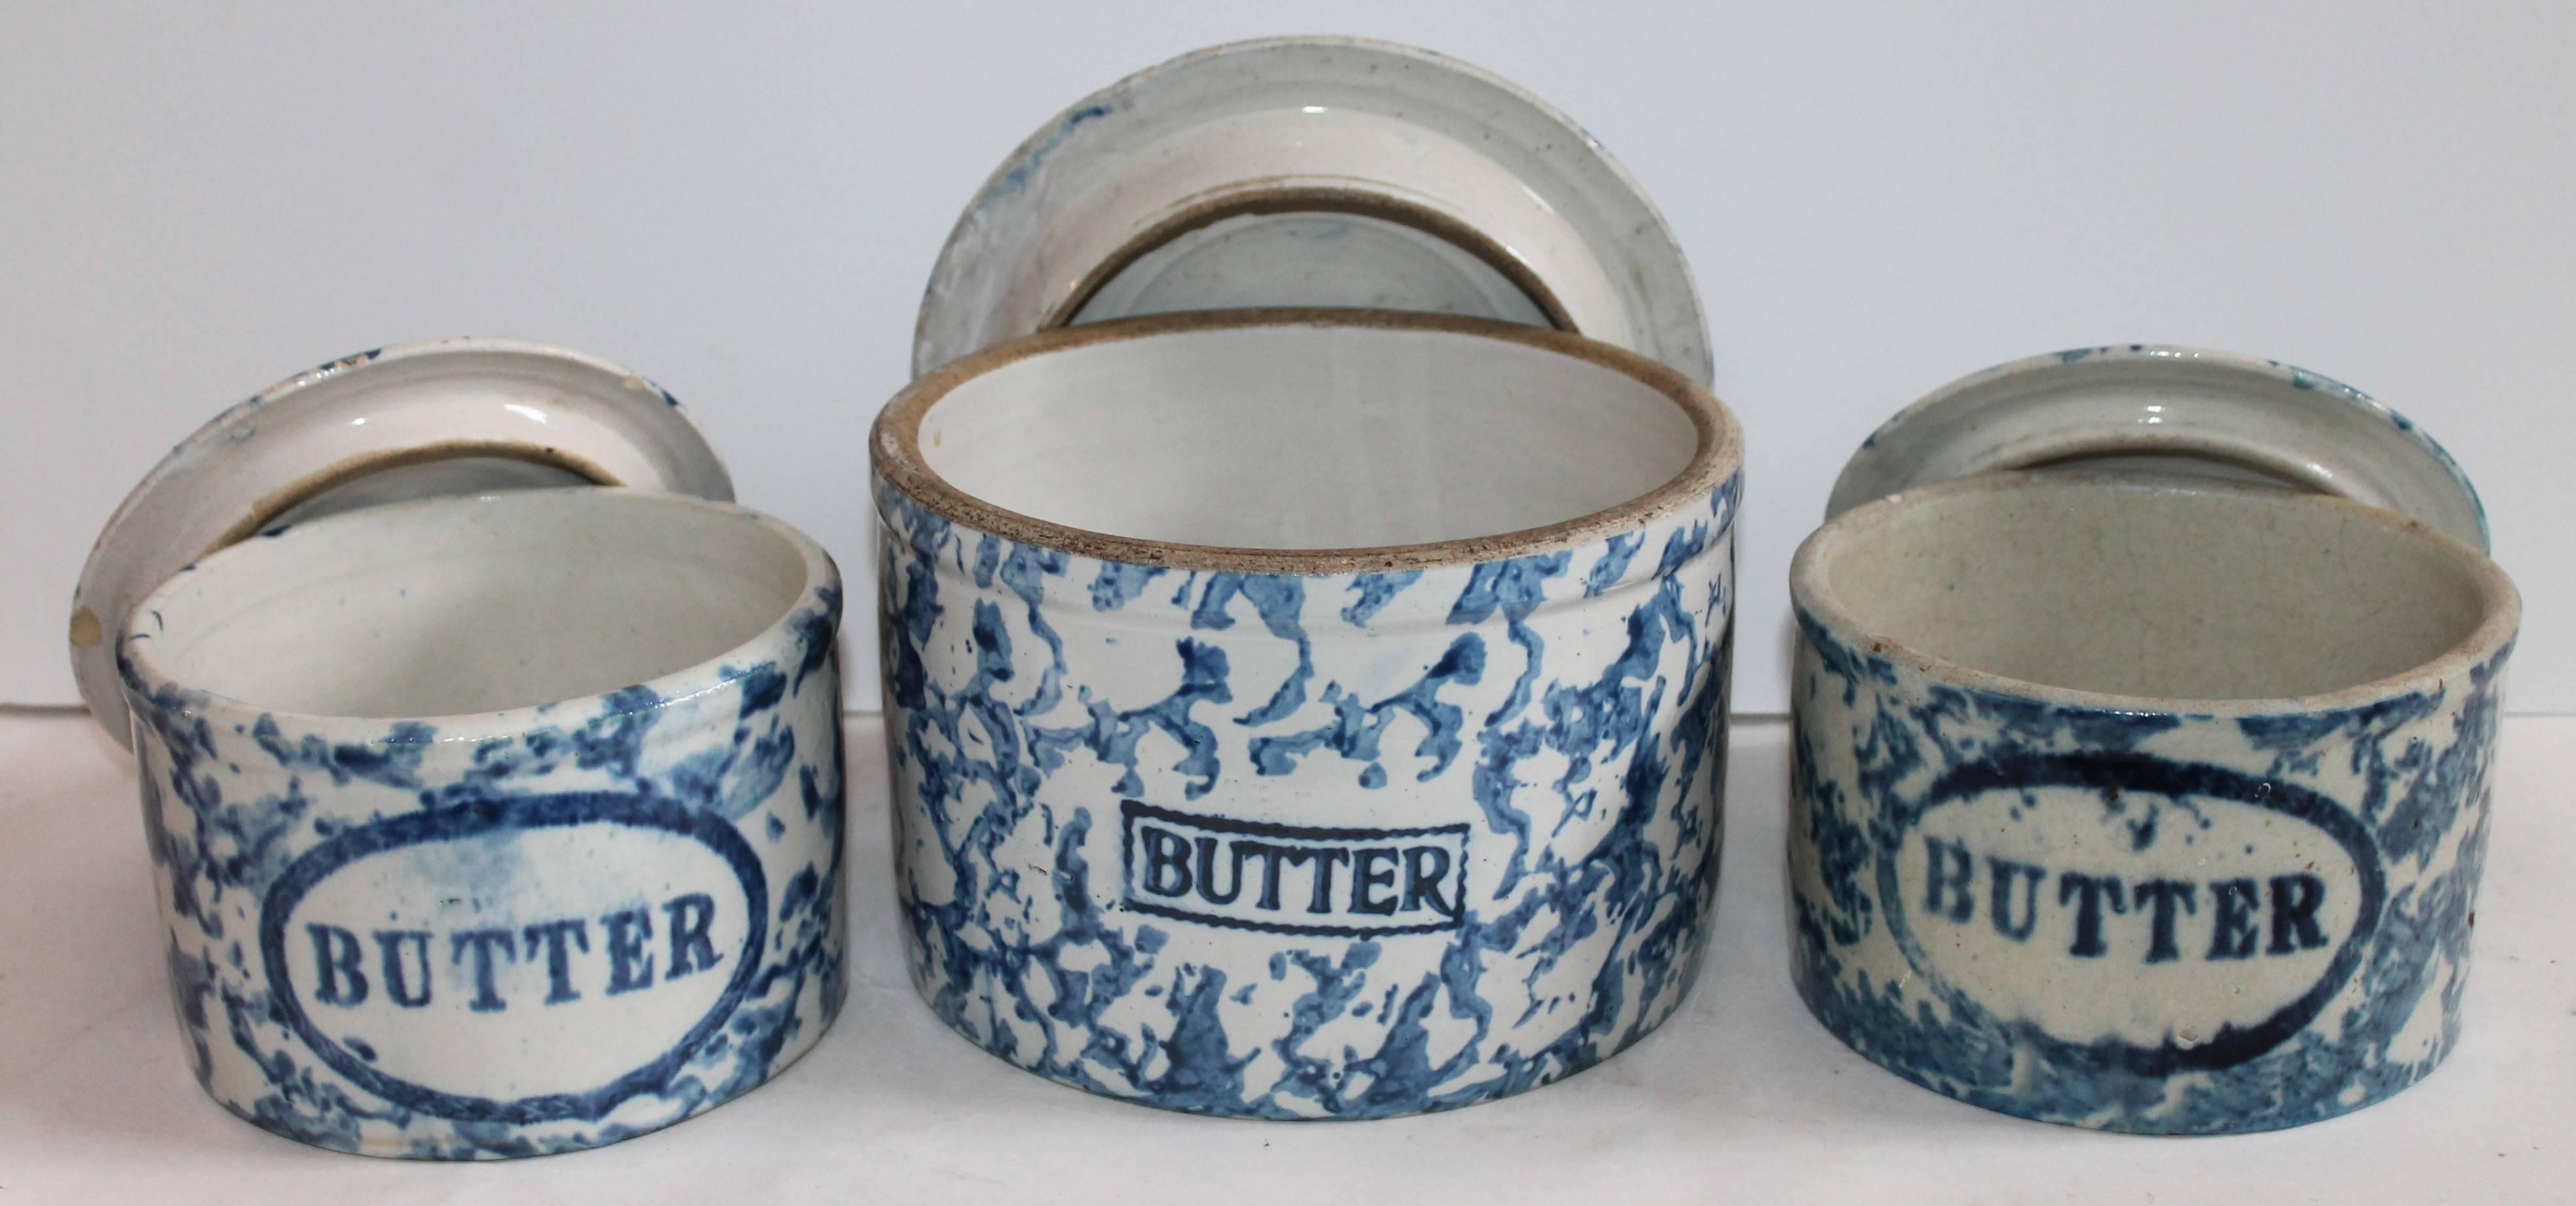 Country Collection of Three 19th Century Sponge Ware Pottery Butter Crocks For Sale